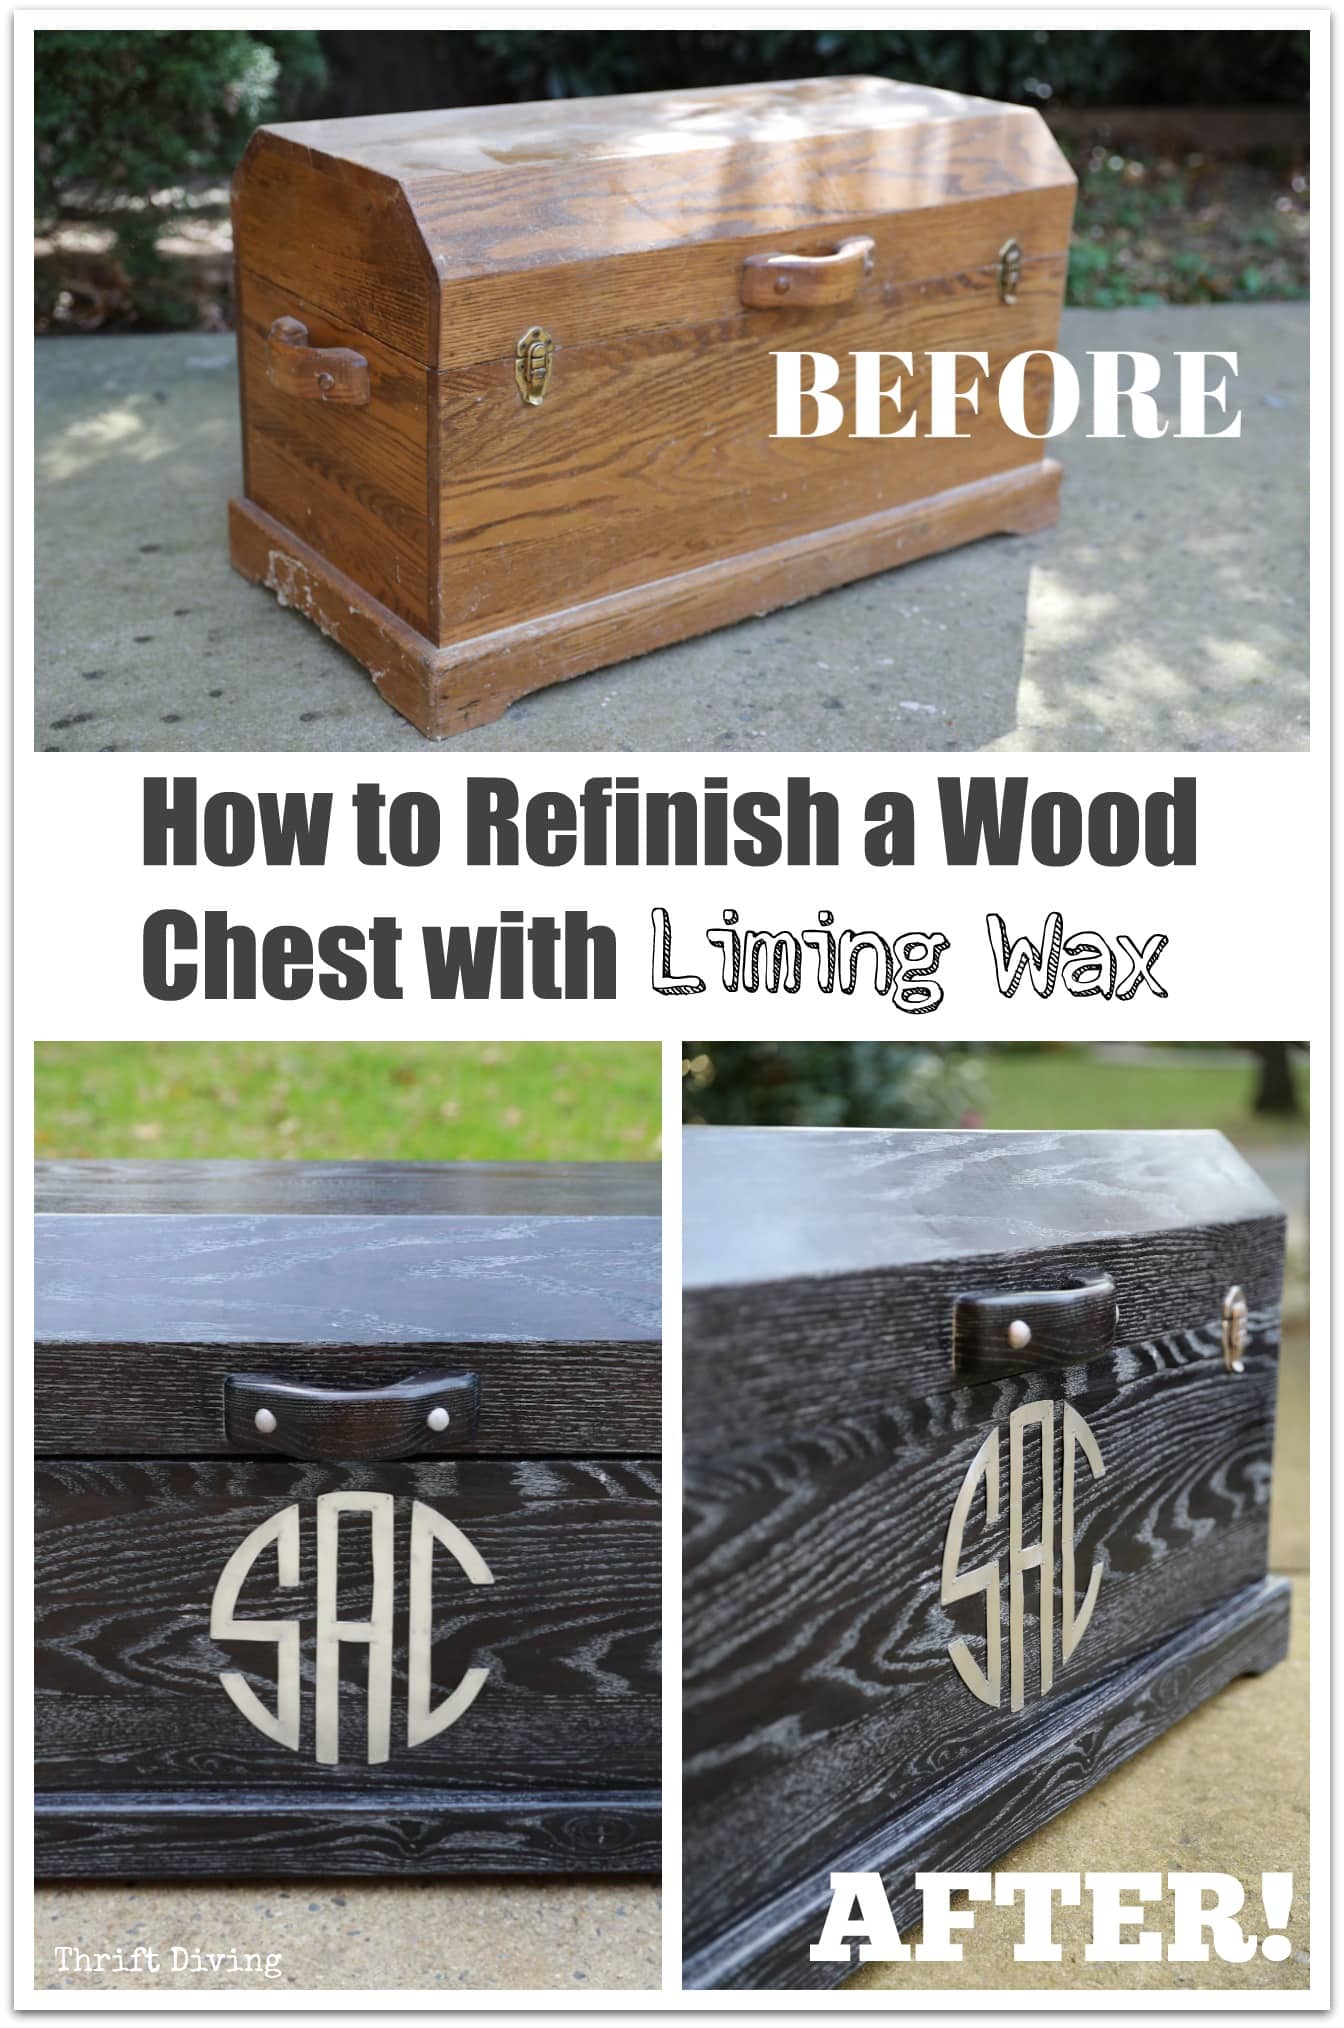 BEFORE & AFTER: How to Use Liming Wax on Oak. See this $40 thrifted wood chest makeover using liming wax and wood dye, with a metal monogram! Includes a full VIDEO TUTORIAL. - Thrift Diving Blog